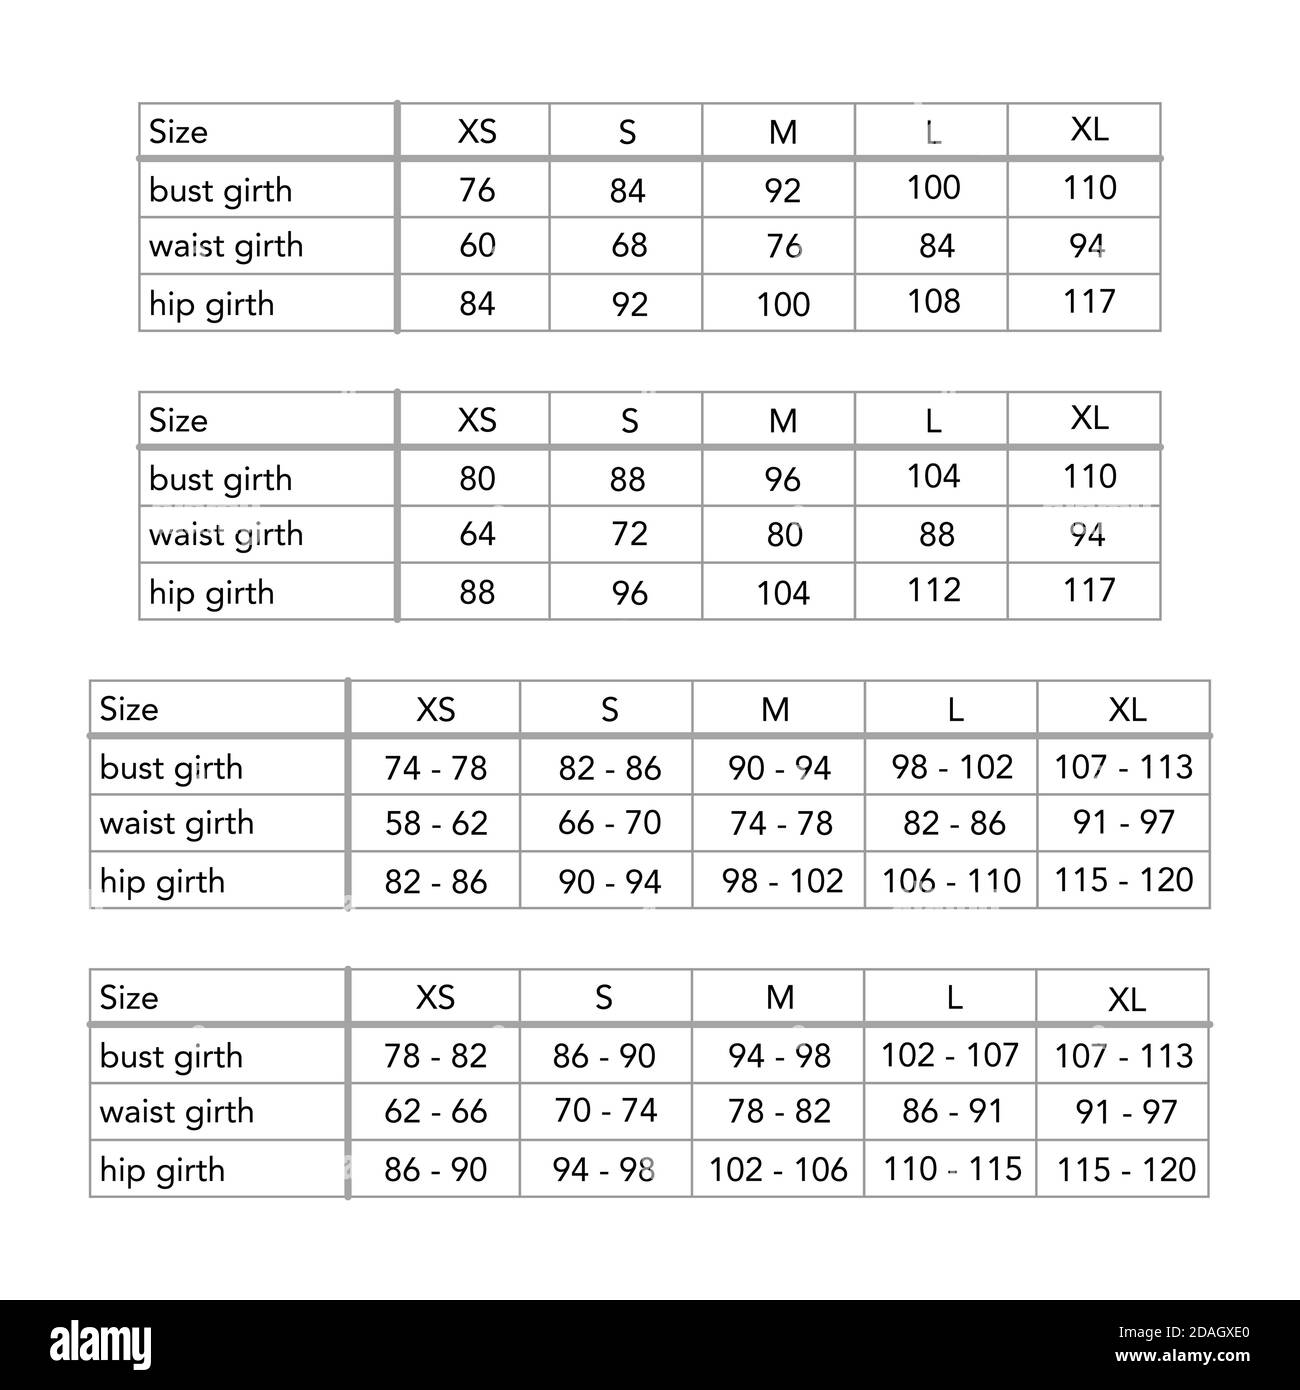 Men new European system clothing standard body measurements for